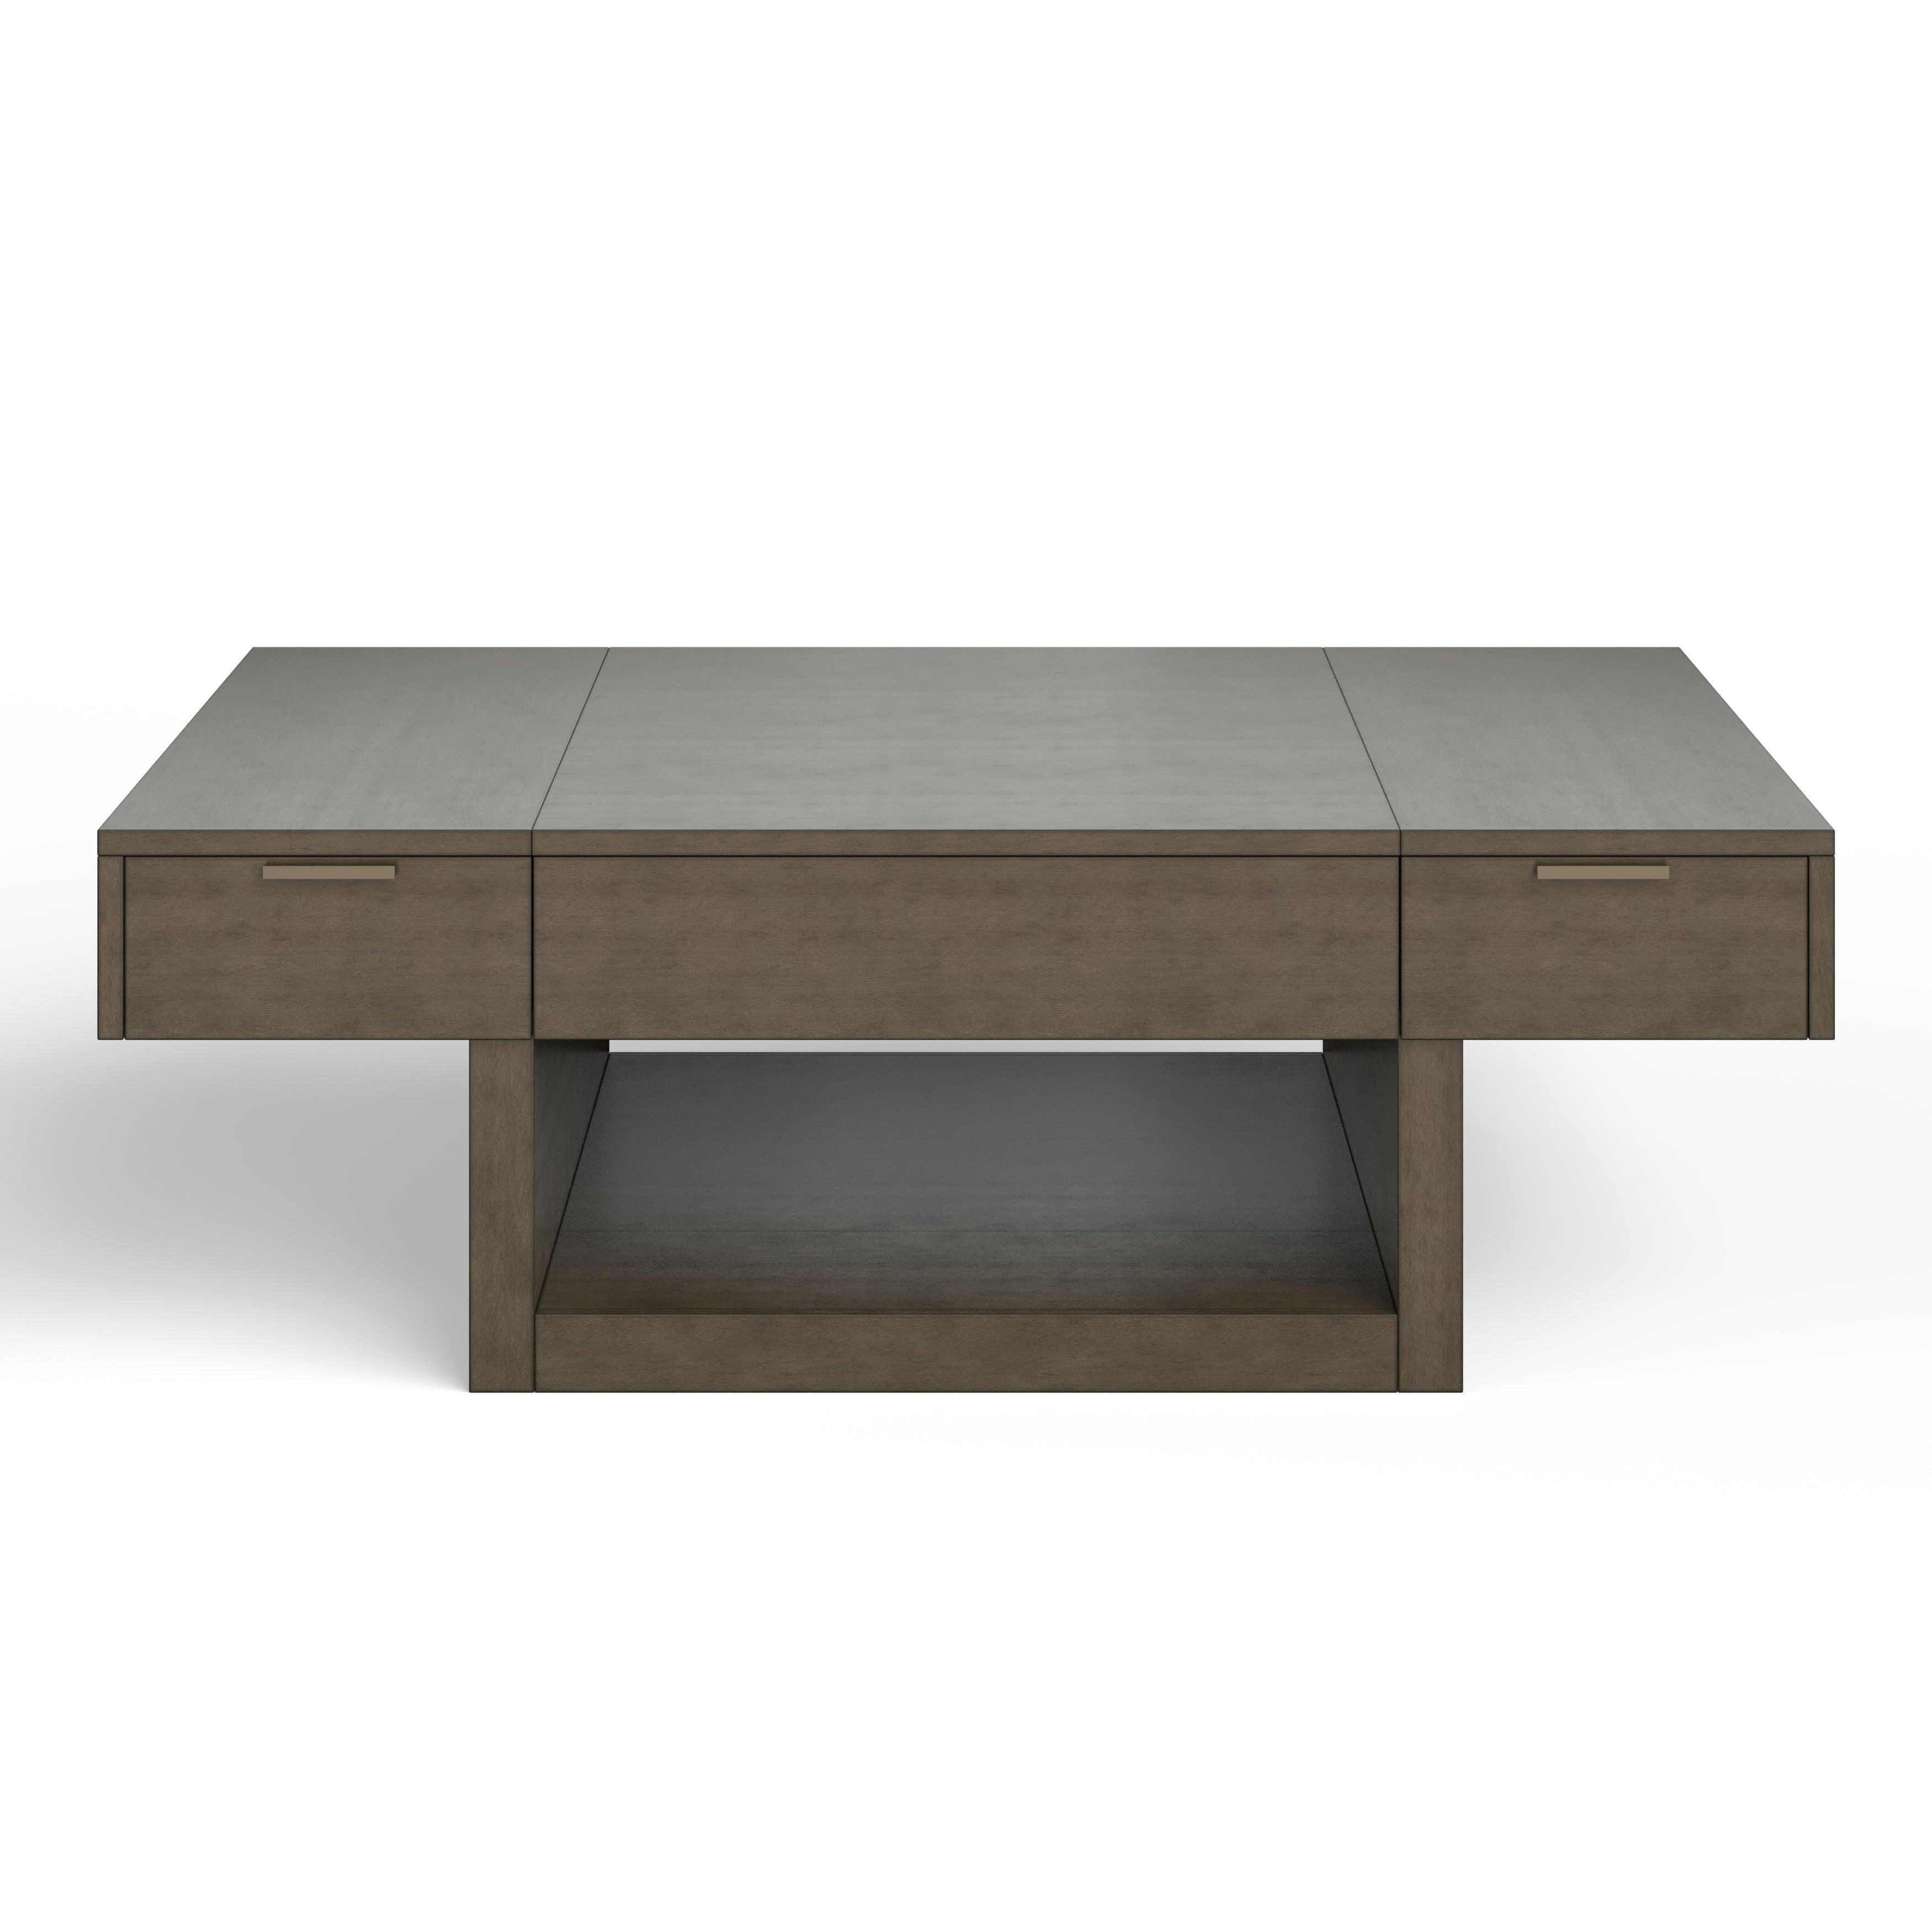 Magnussen Furniture - McGrath - Lift Top Cocktail Table With Casters - Urbane Bronze - 5th Avenue Furniture